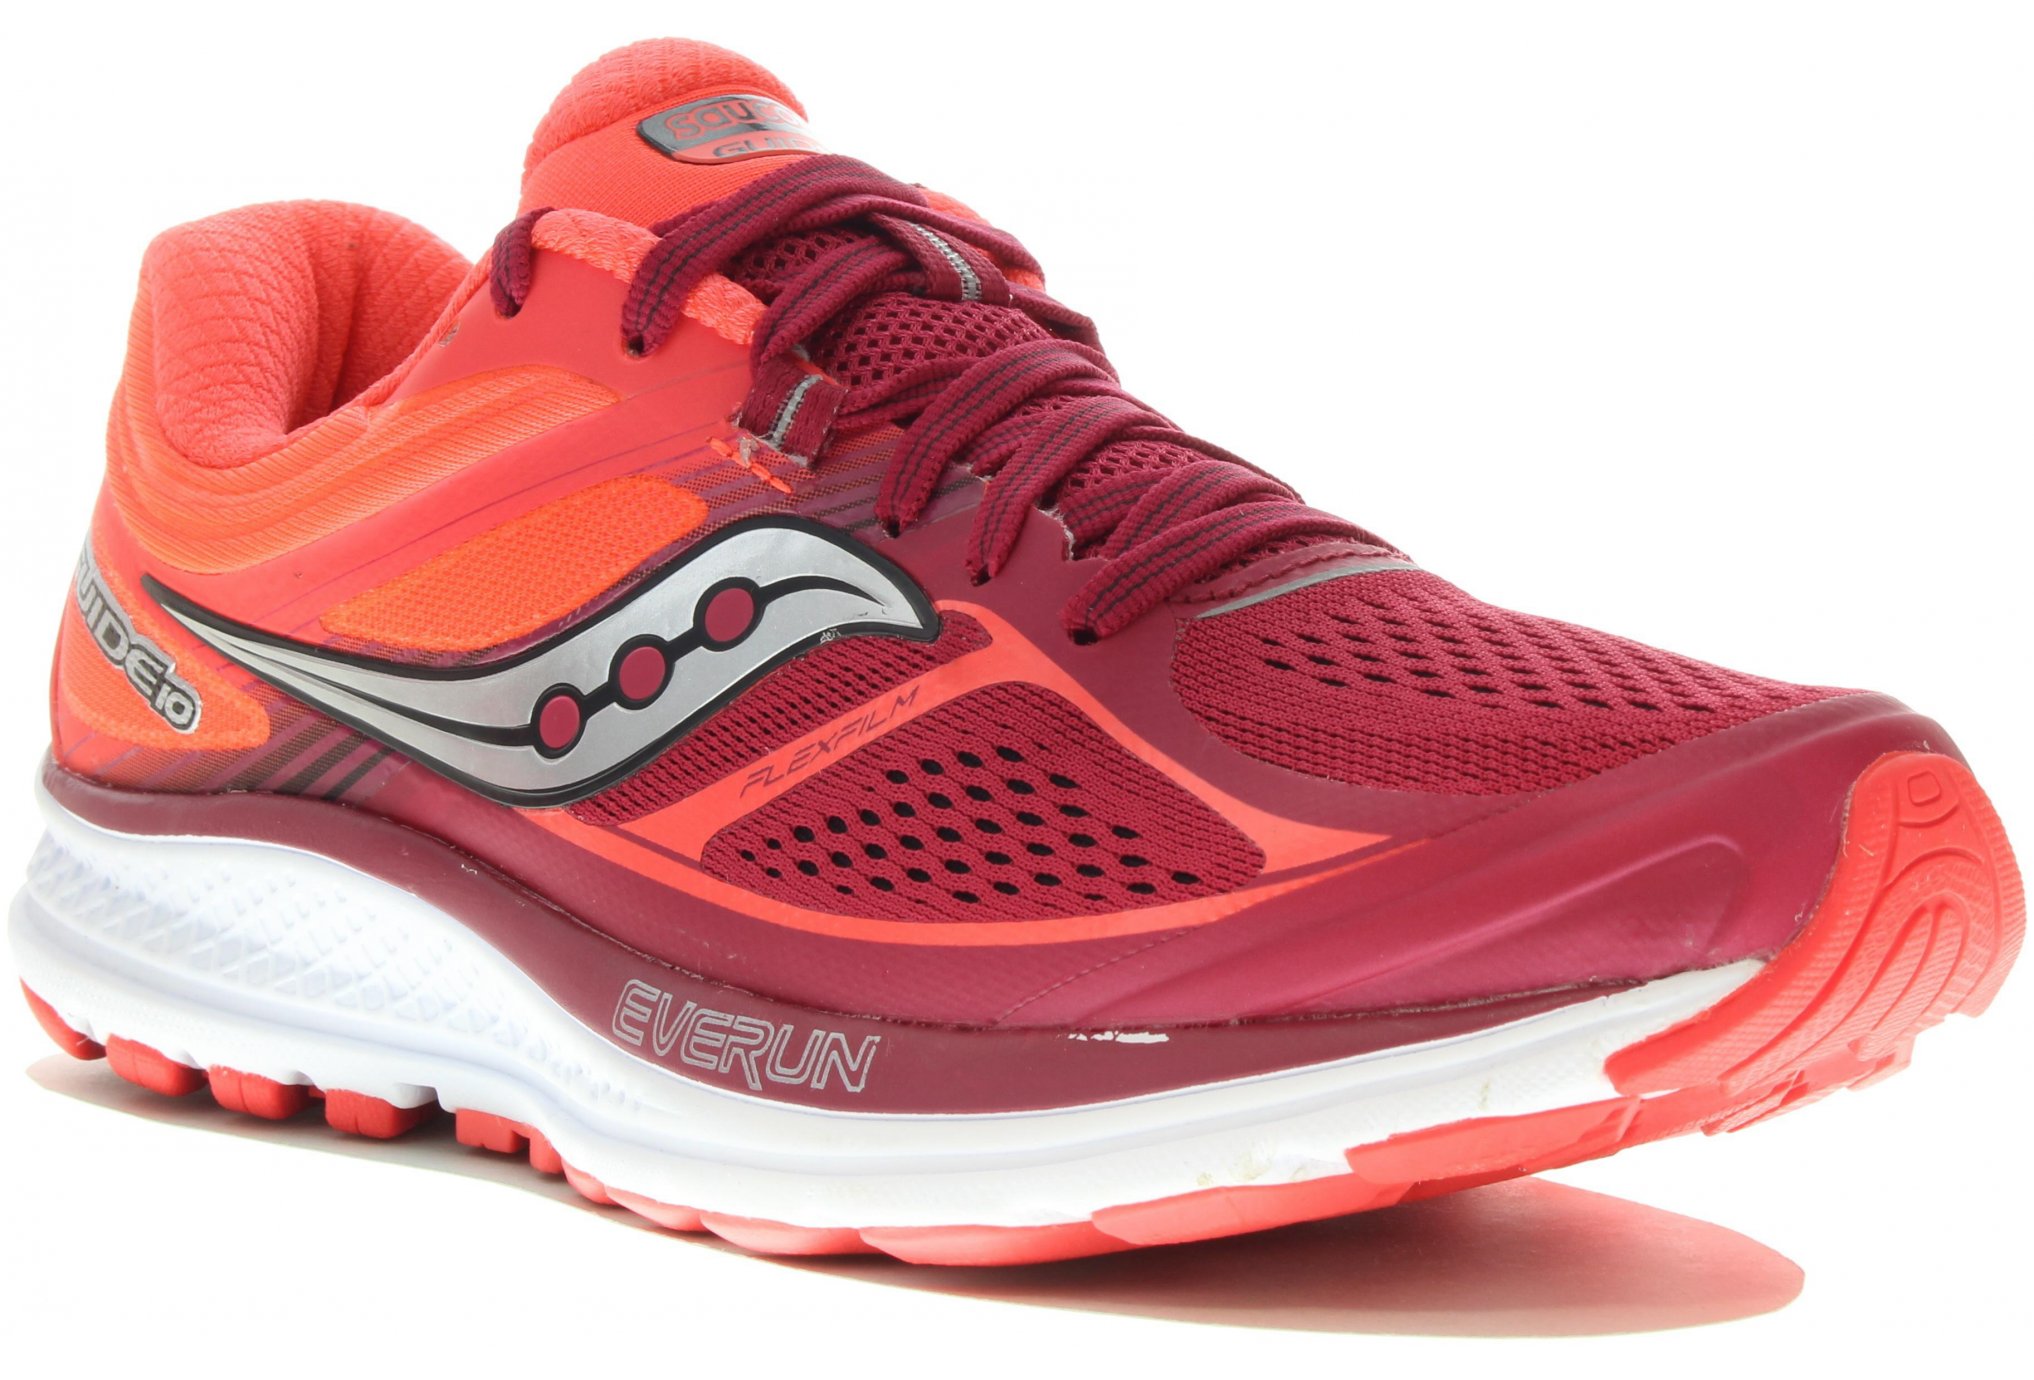 saucony guide 10 mujer negro